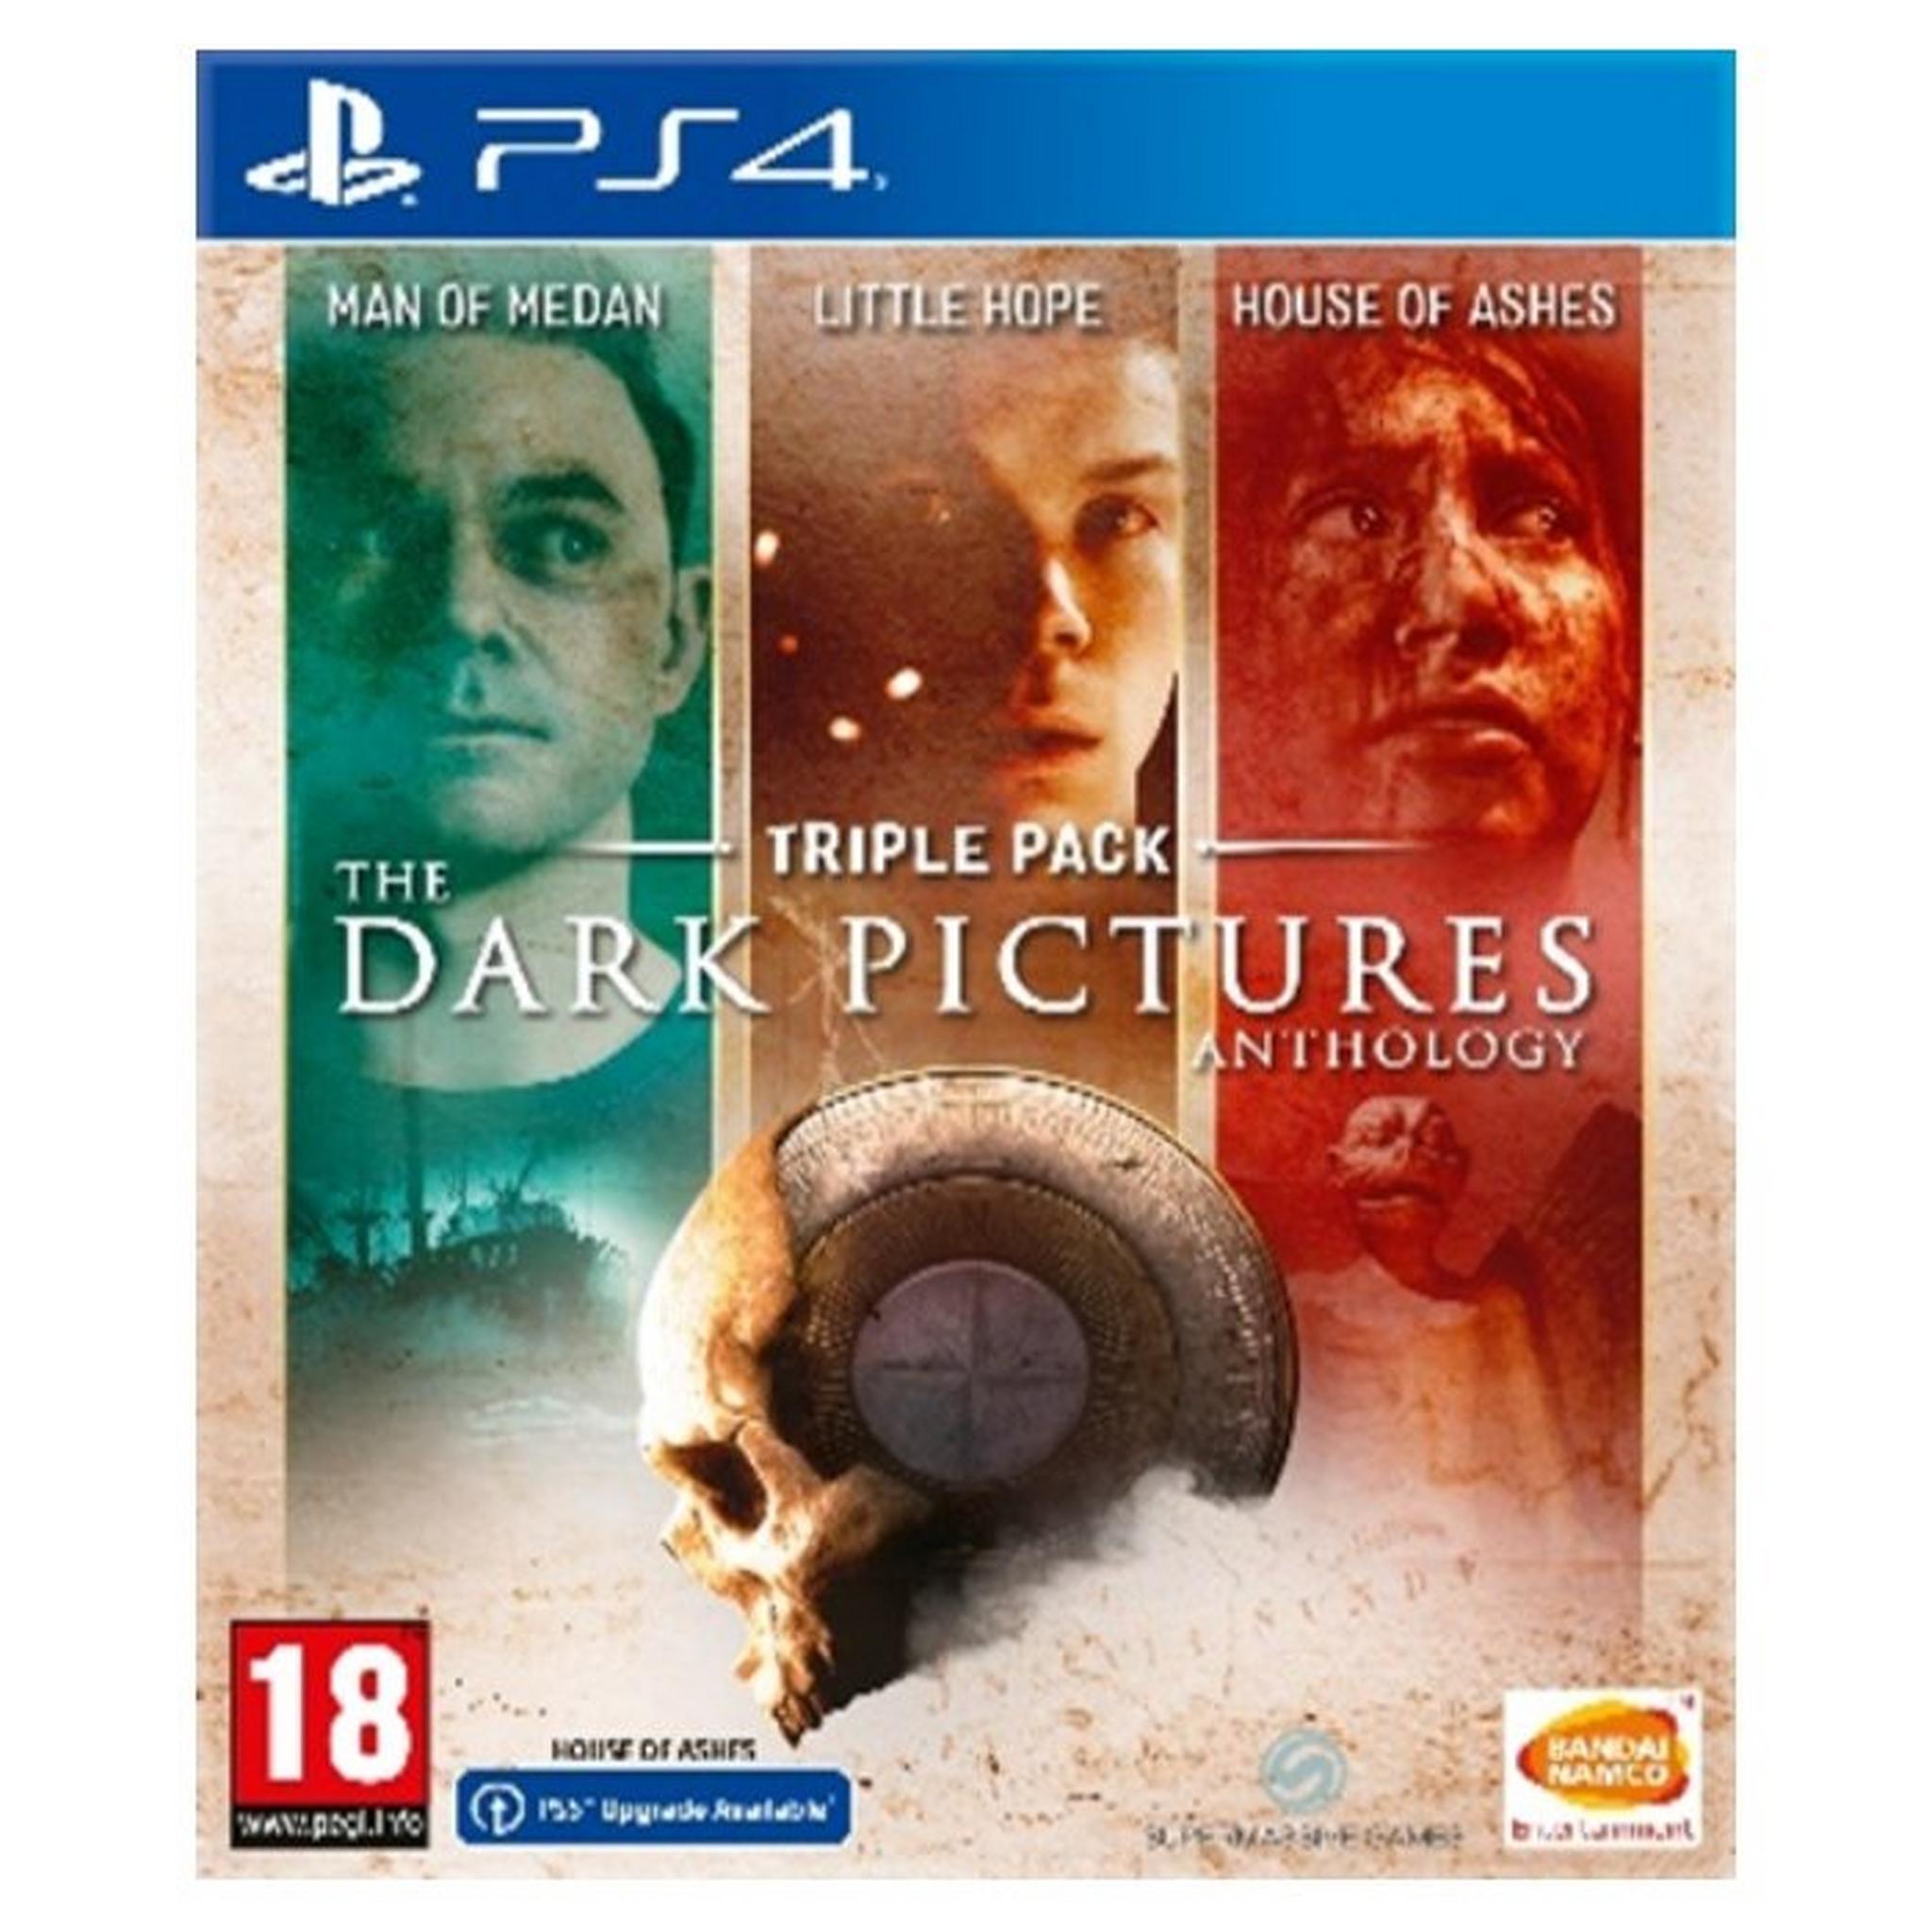 The Dark Pictures Anthology Compilation - PS4 Game